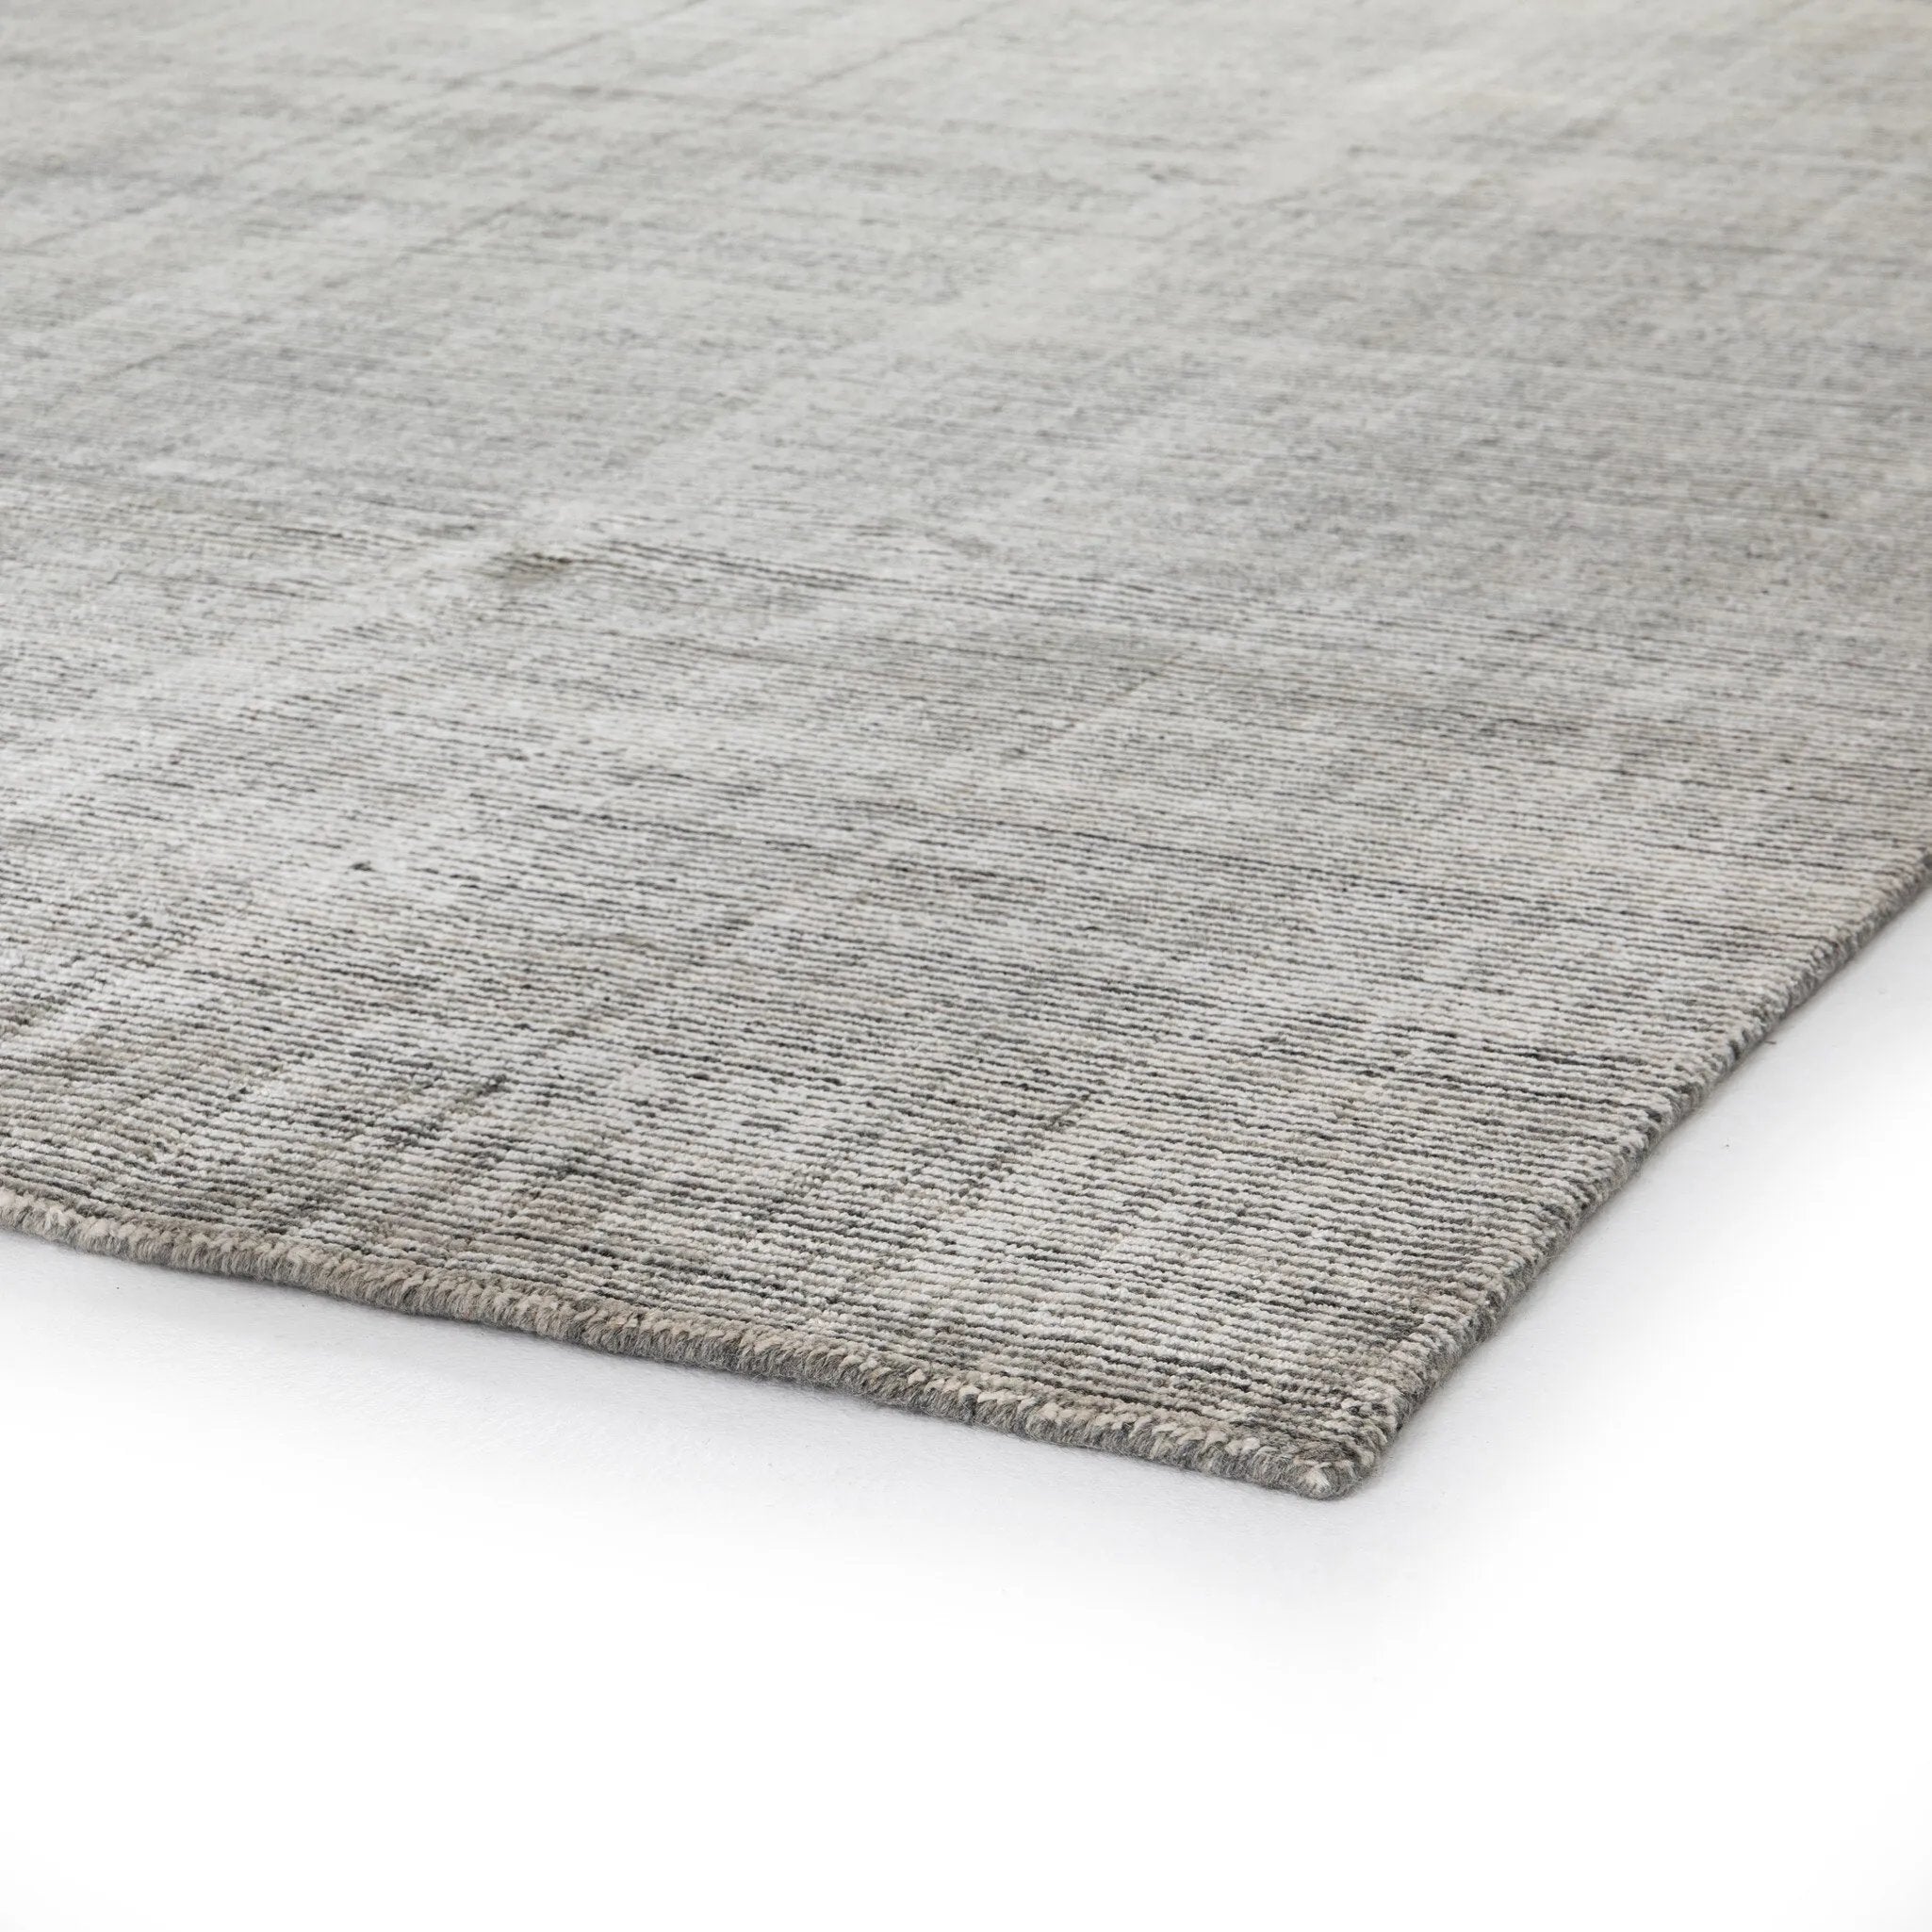 With a loop and short pile of alternating wool and viscose, neutral grey and beige hues contrast for a versatile look and tactile texture.Overall Dimensions144.00"w x 0.50"d x 180.00"hFull Details &amp; SpecificationsTear SheetCleaning Code : X (vacuum Or Light Brush, No Cleaning Products Amethyst Home provides interior design, new home construction design consulting, vintage area rugs, and lighting in the San Diego metro area.